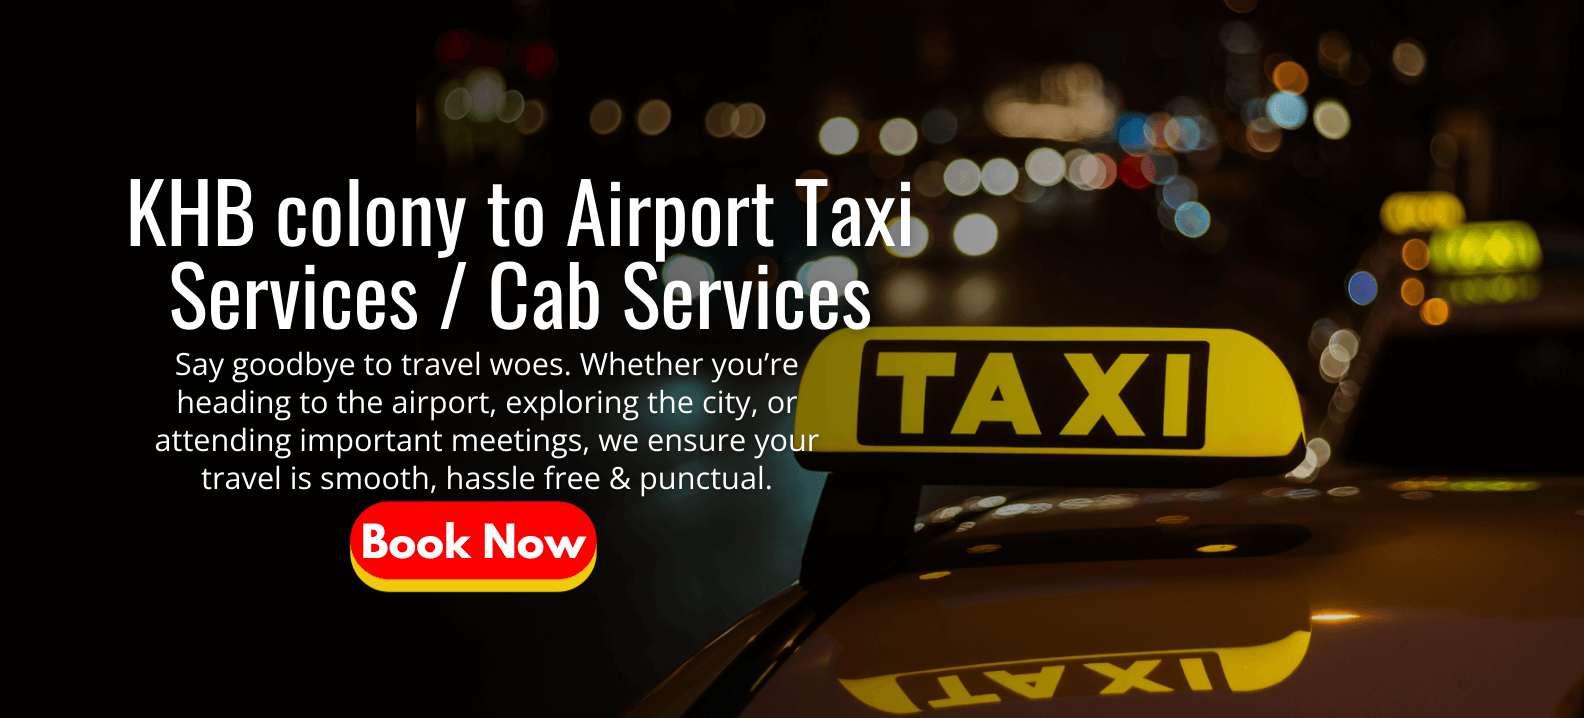 KHB colony to Airport Taxi Services _ Cab Services